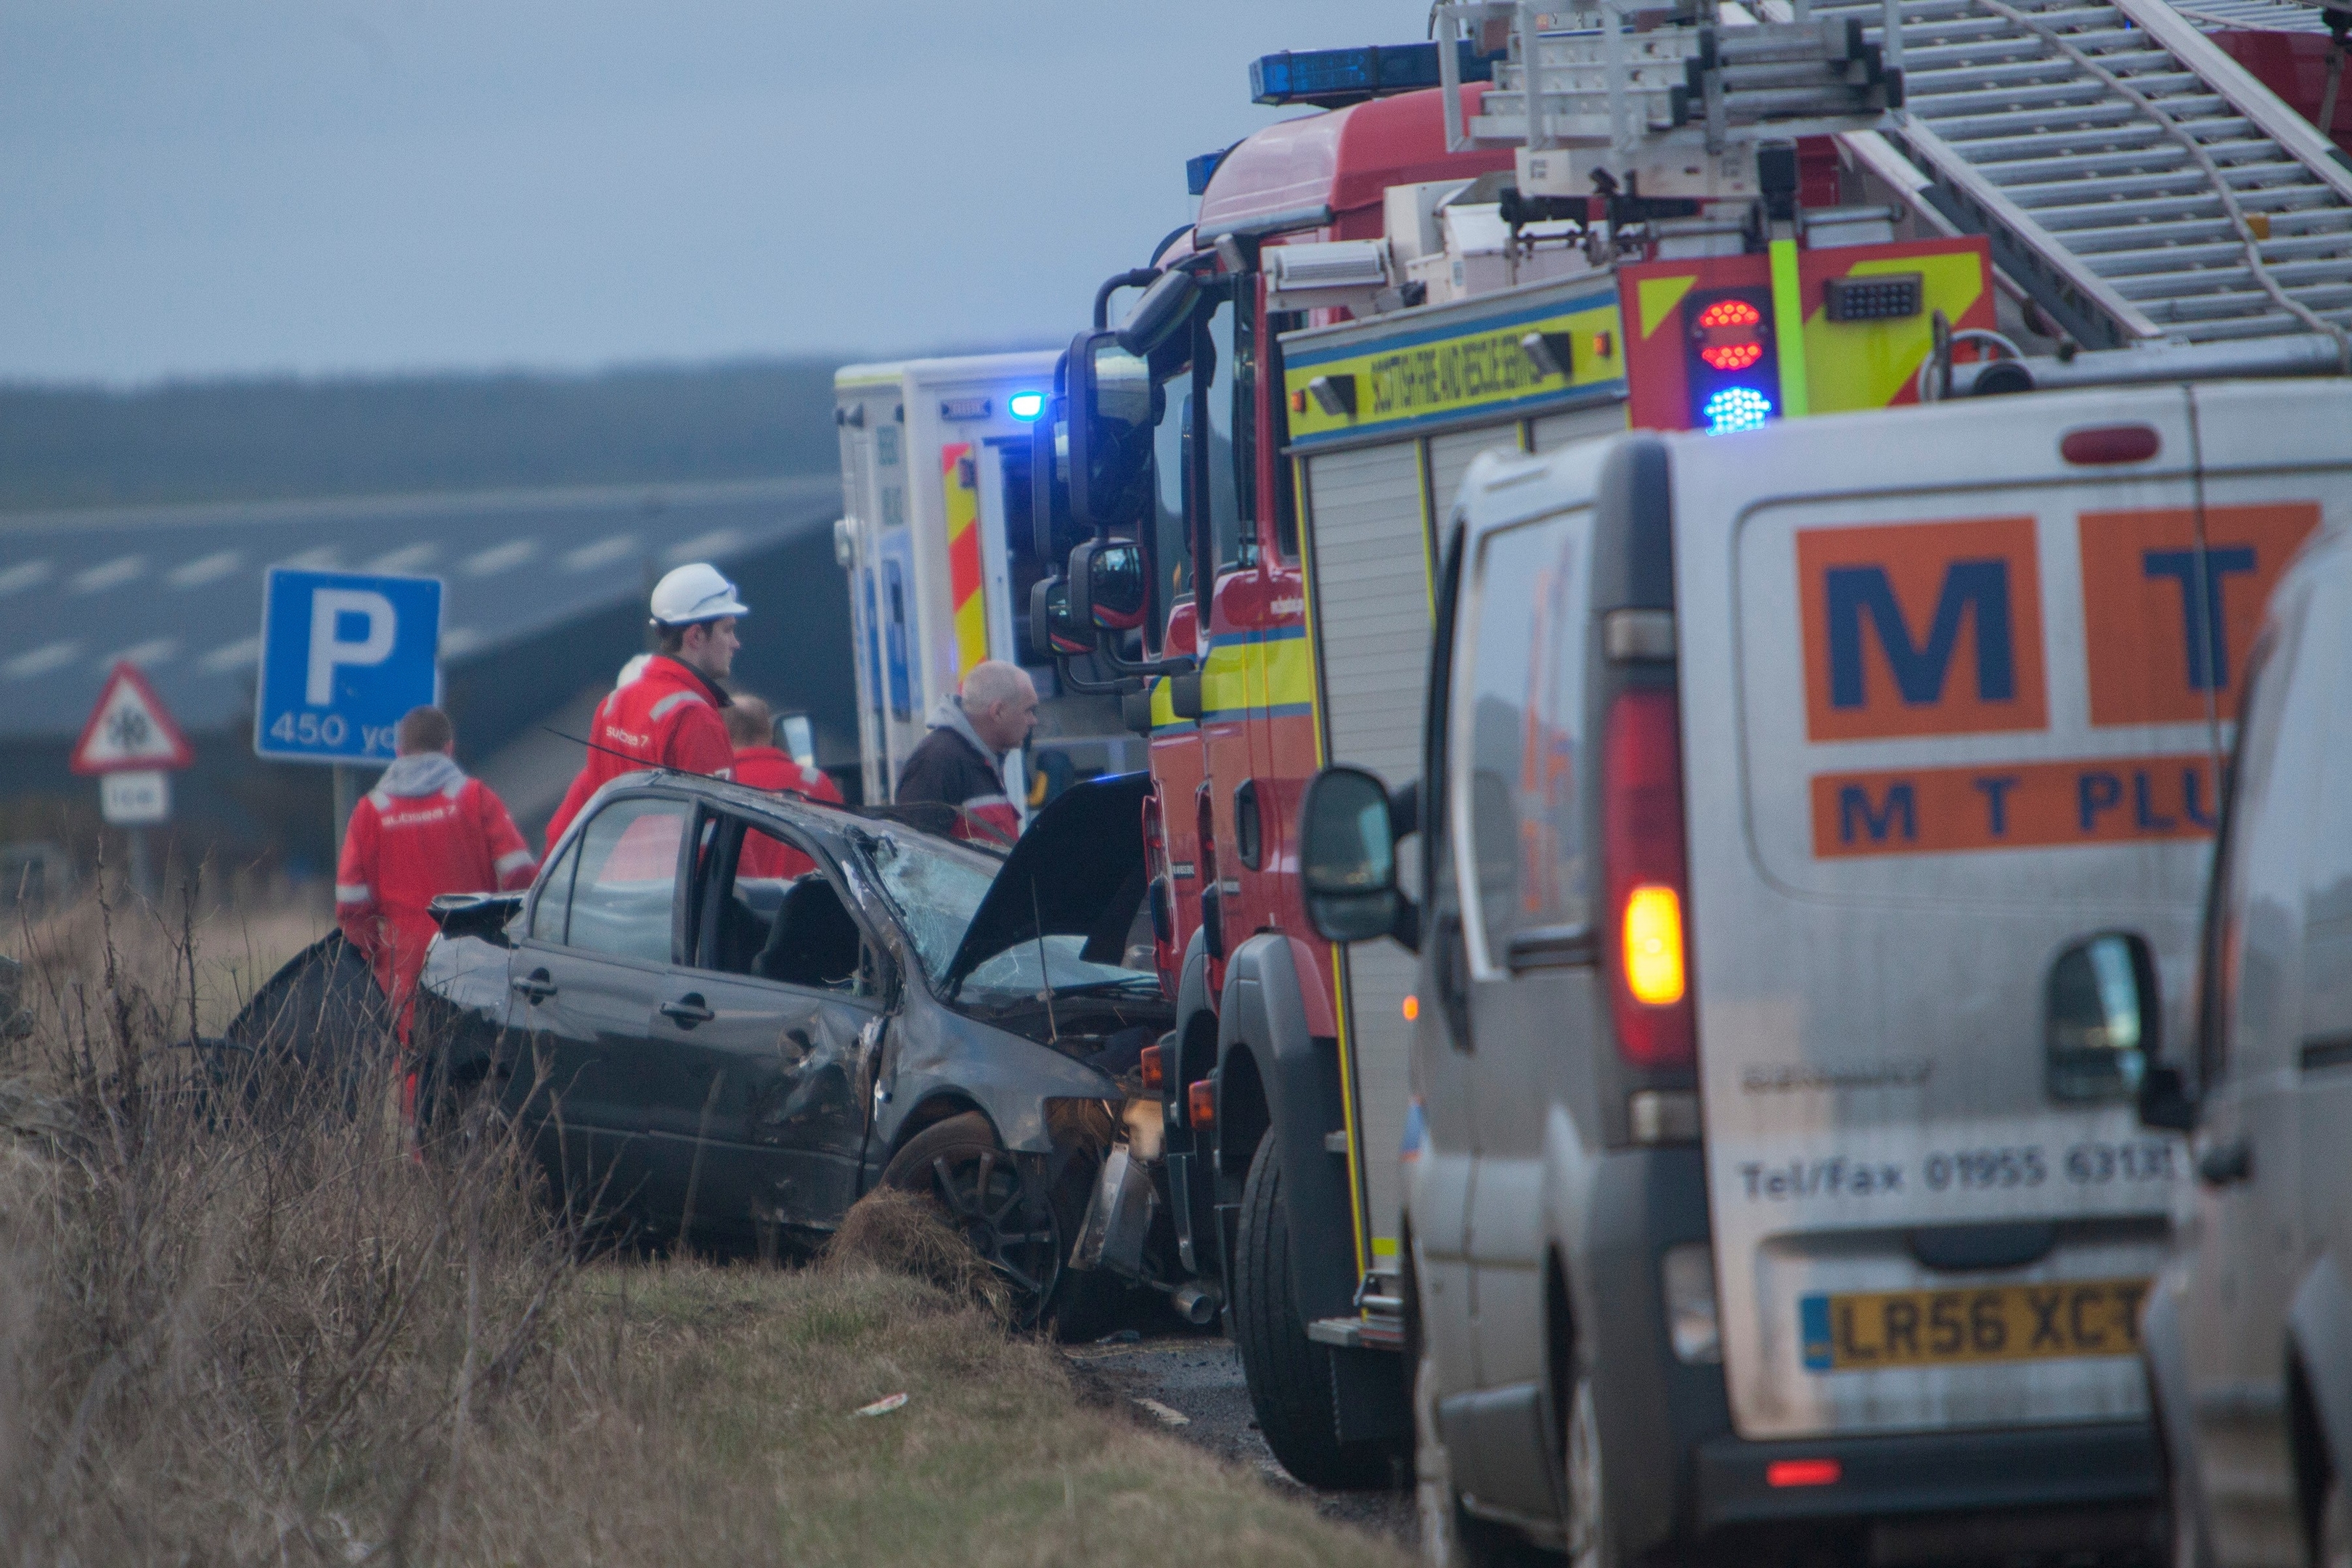 The scene of the accident at Westerloch about five miles North of Wick on the A99.